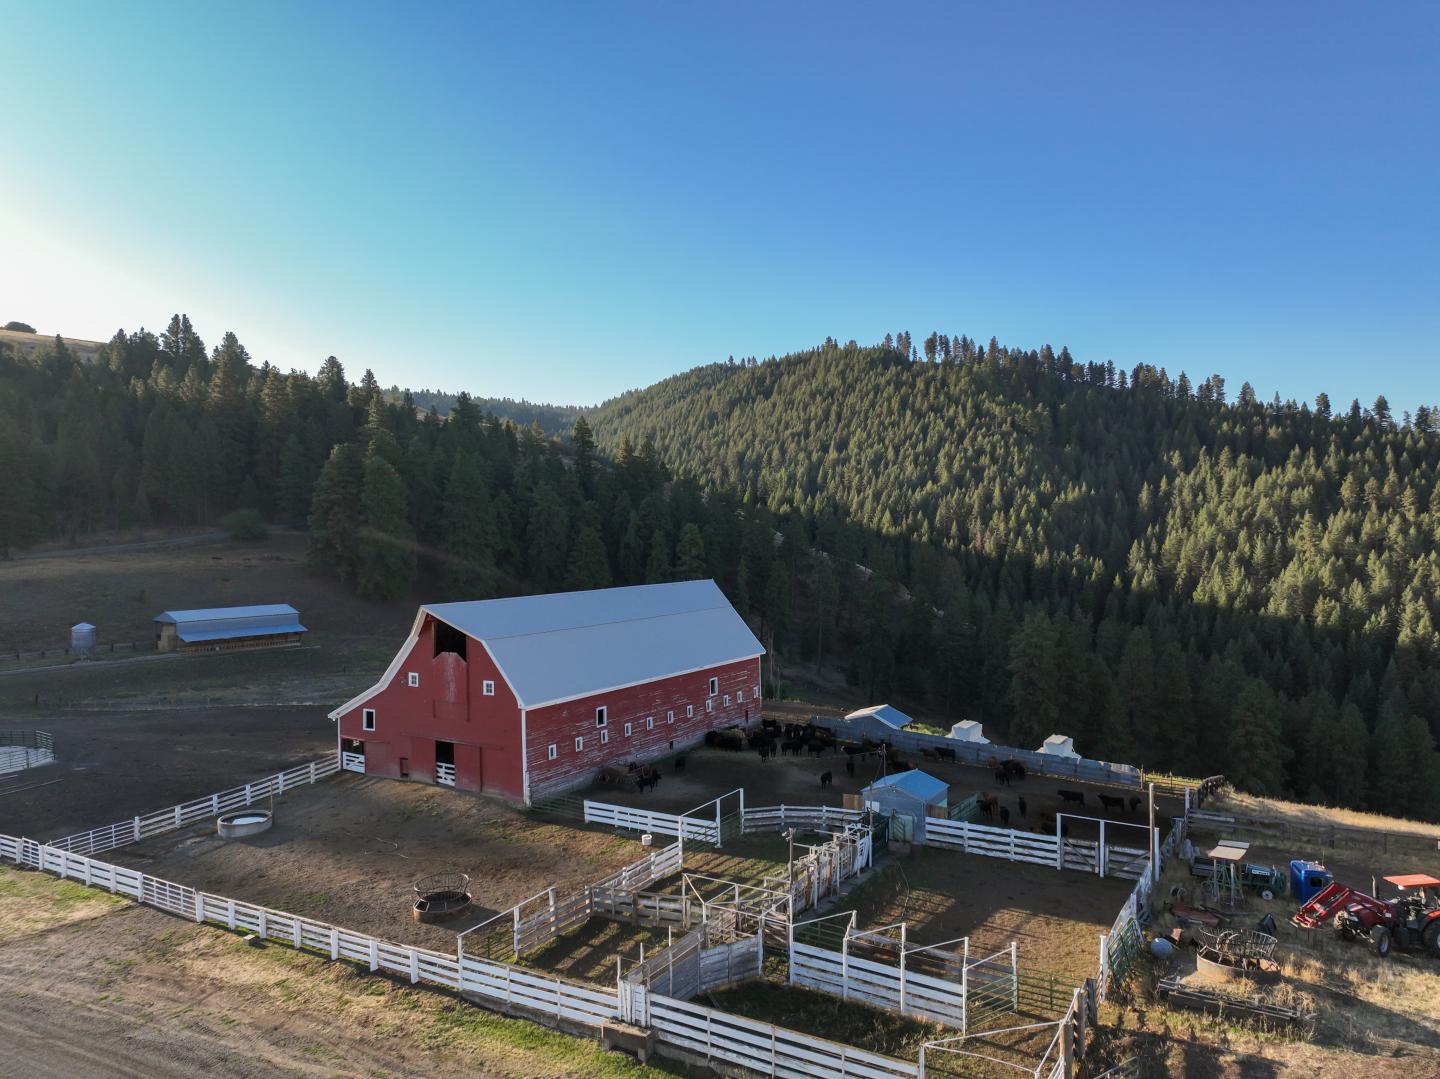 The Wittman family farm from a drone shot shows a red barn and white fences